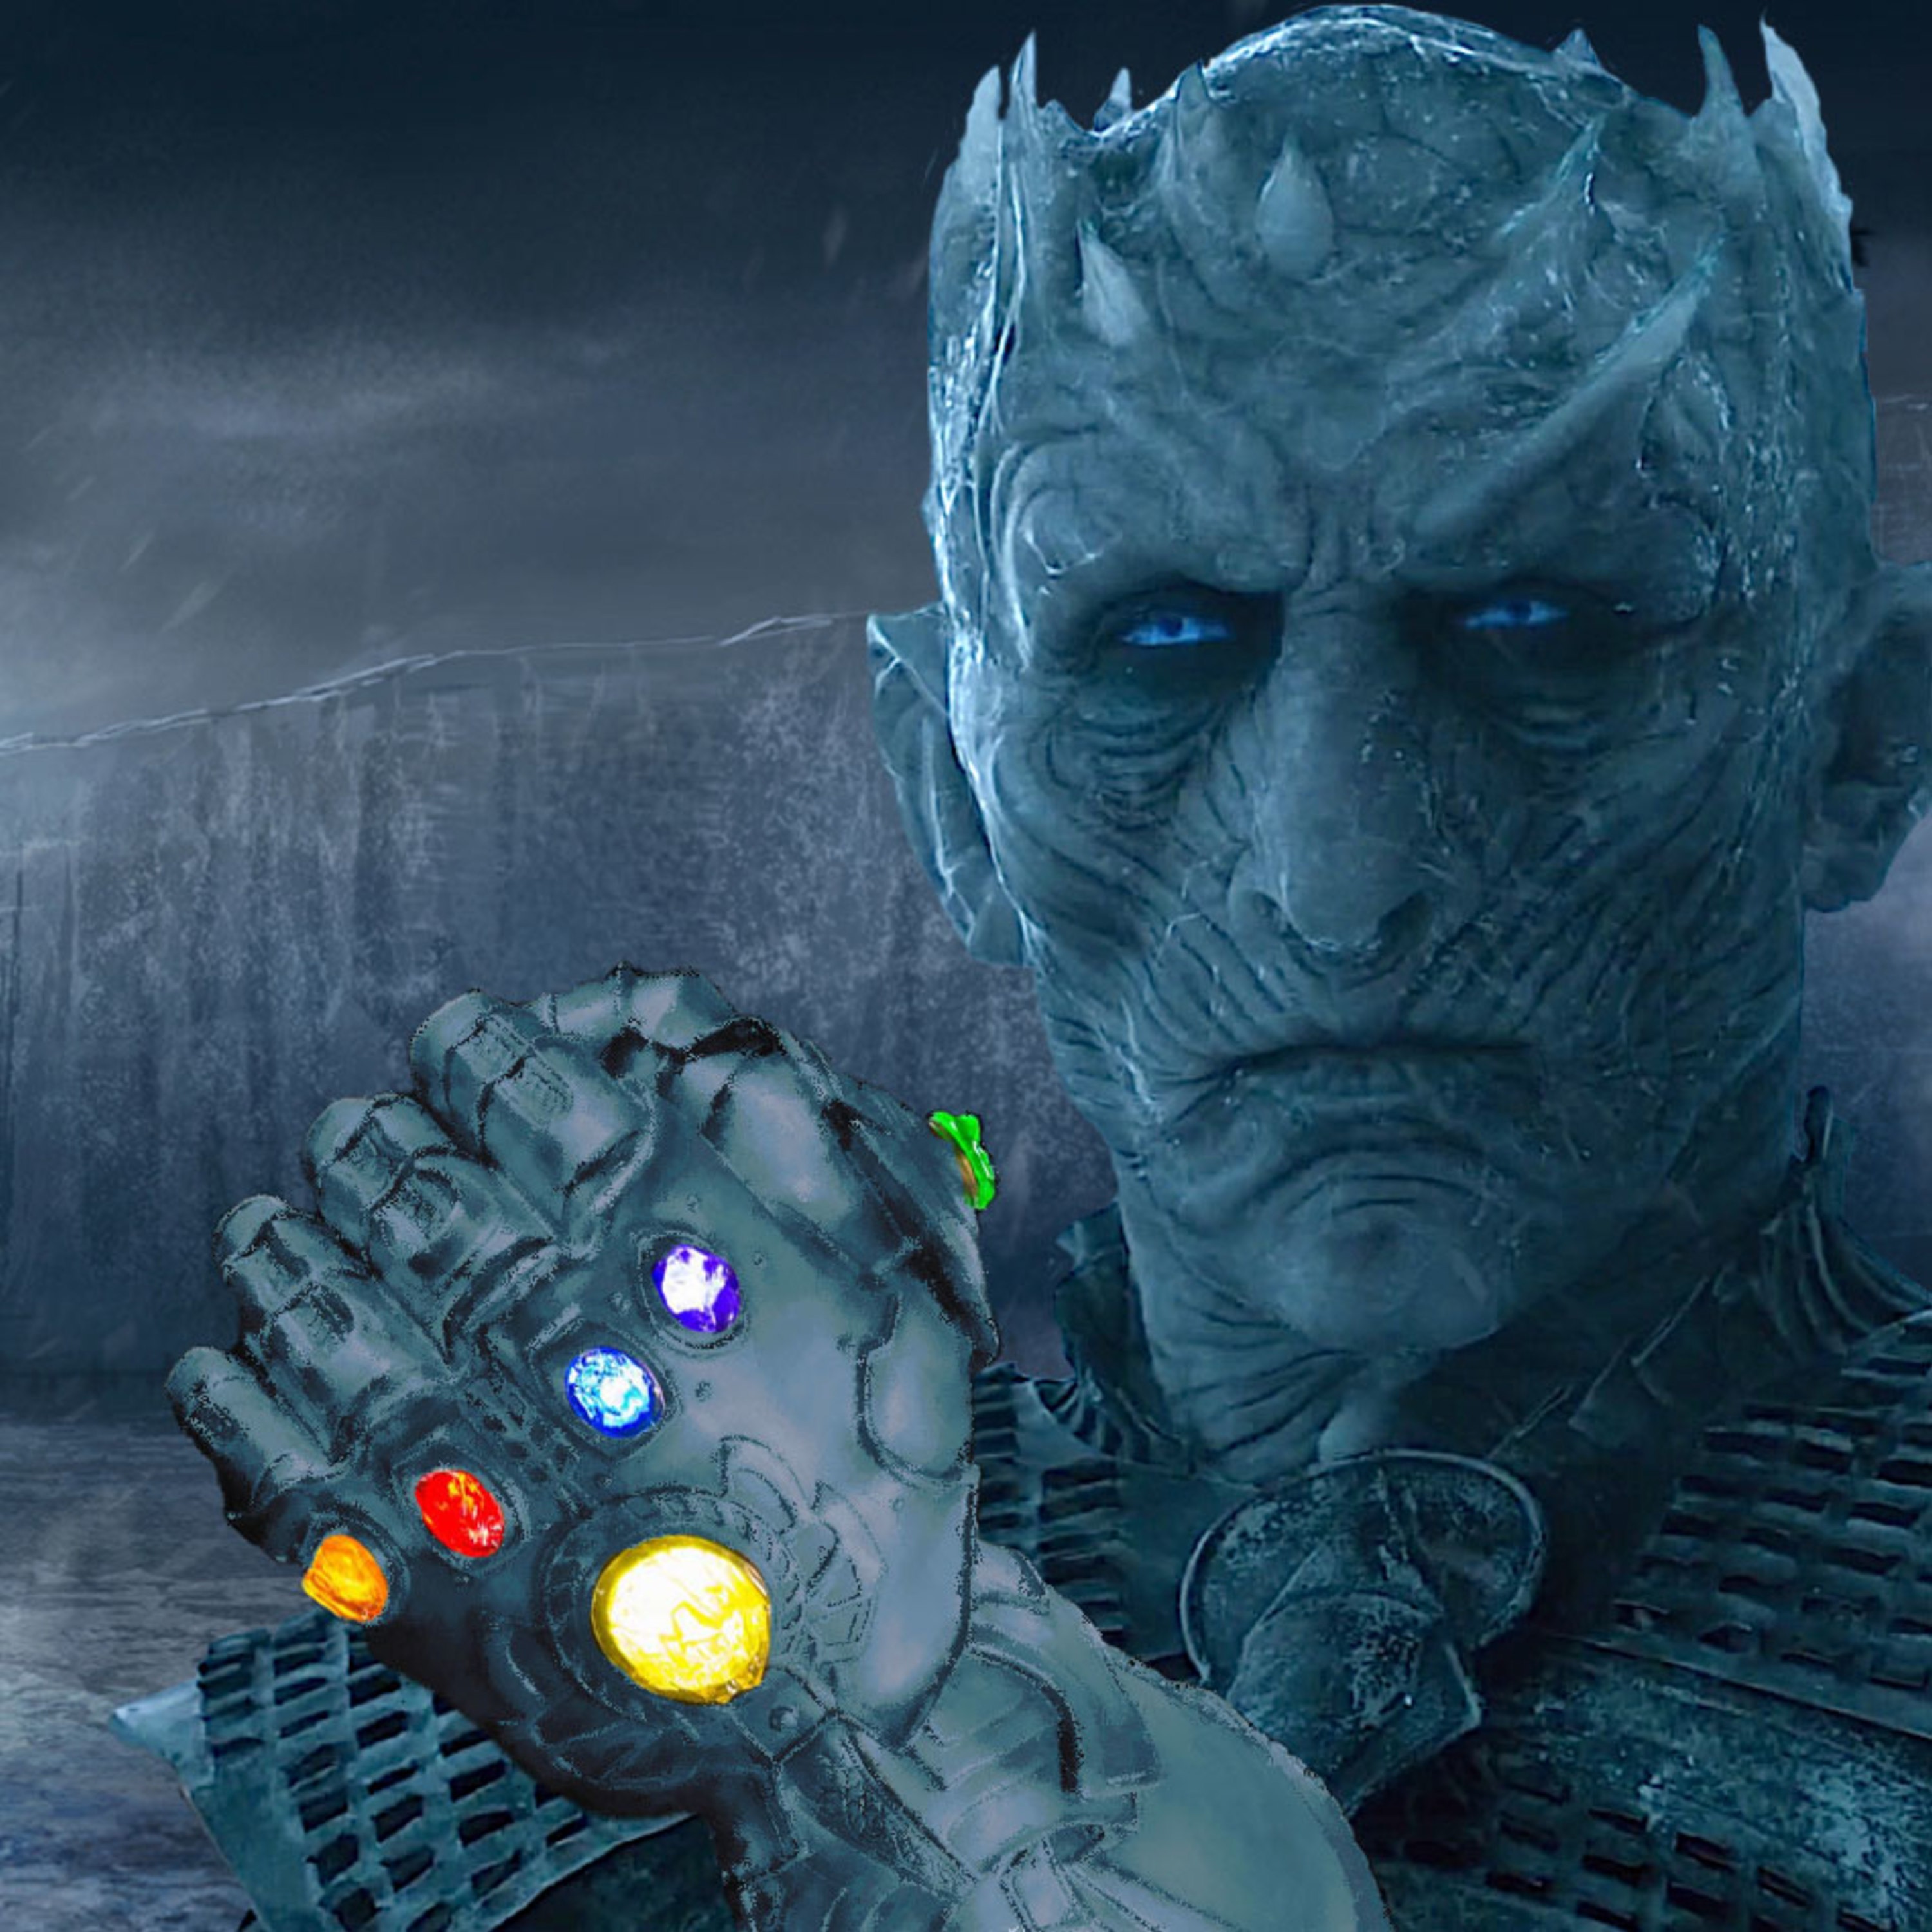 Episode 45: The Night King: End Game